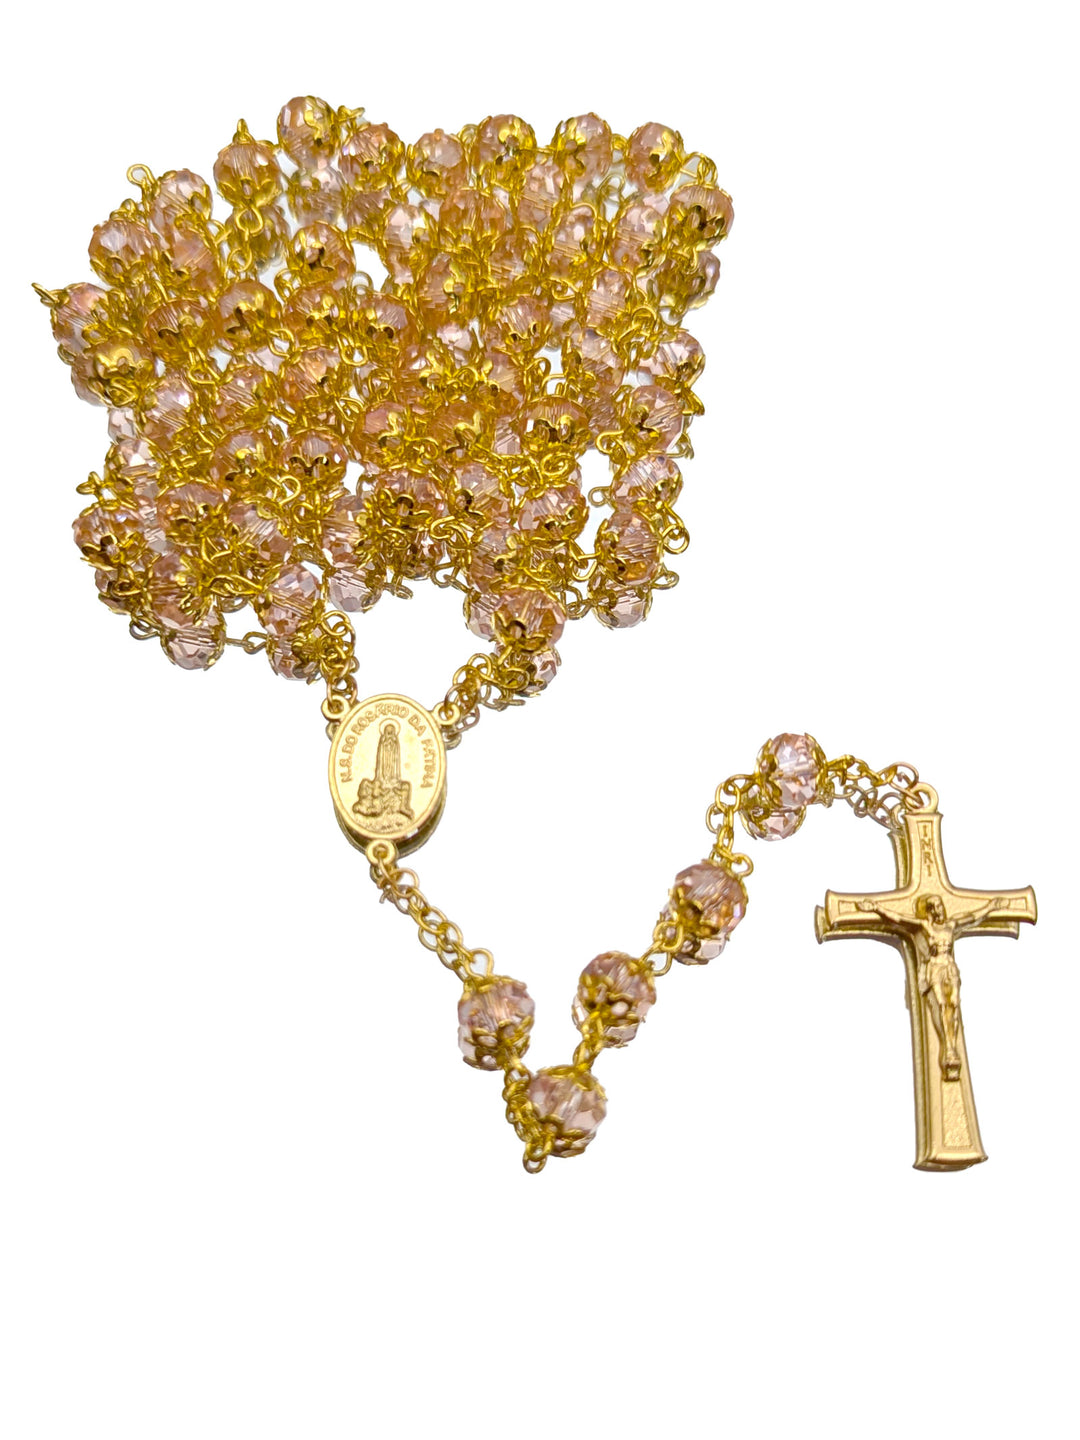 Handmade 7mm Pink Crystal Beads Our Lady of Fatima Golden Rosary